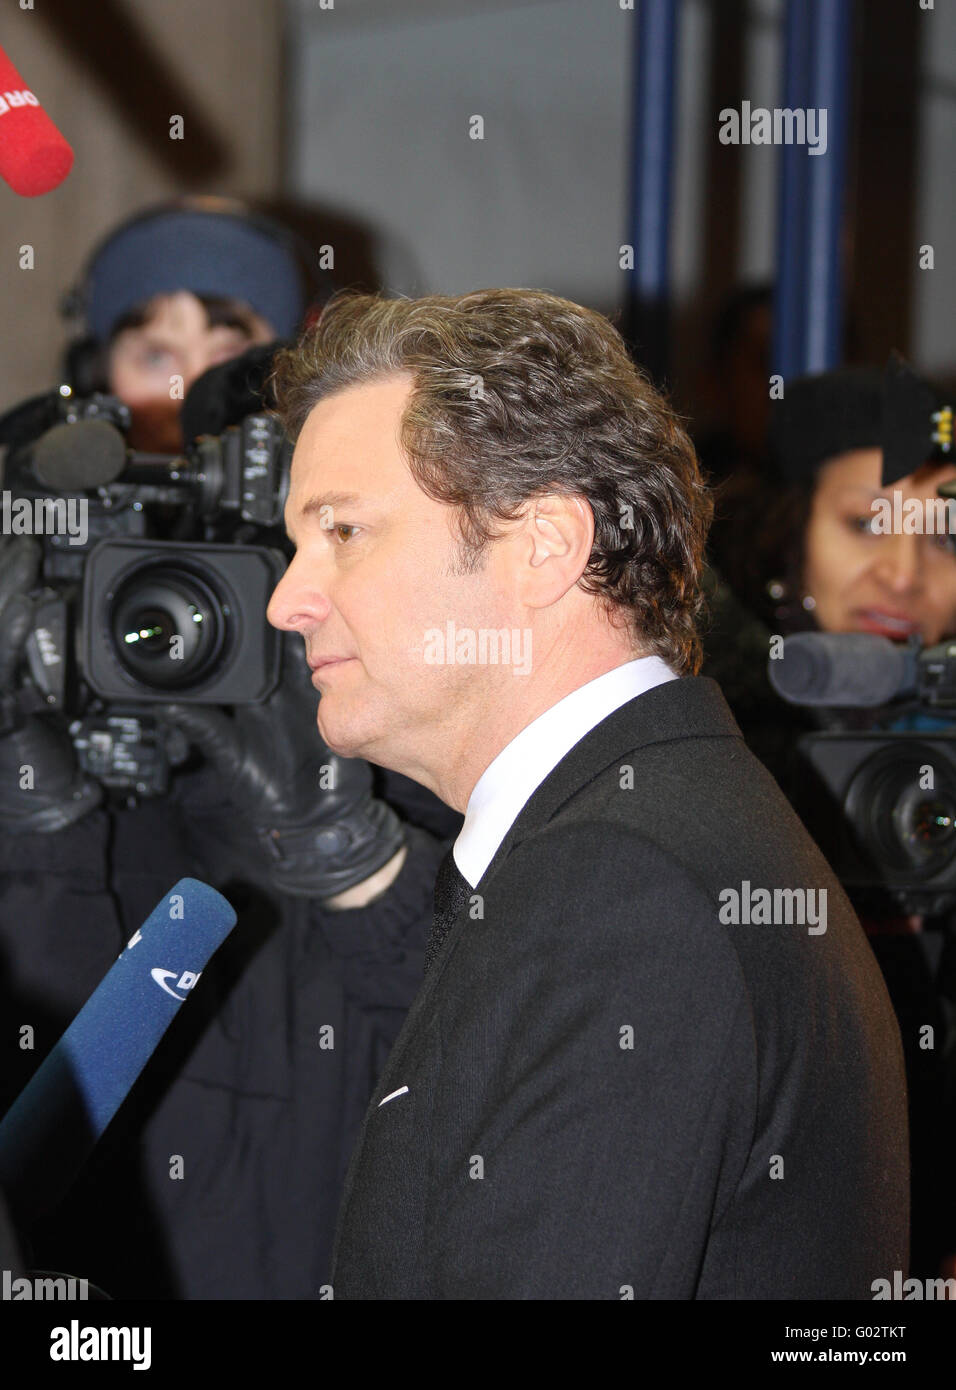 Berlinale 2011: Colin Firth - The King's Speech Stock Photo